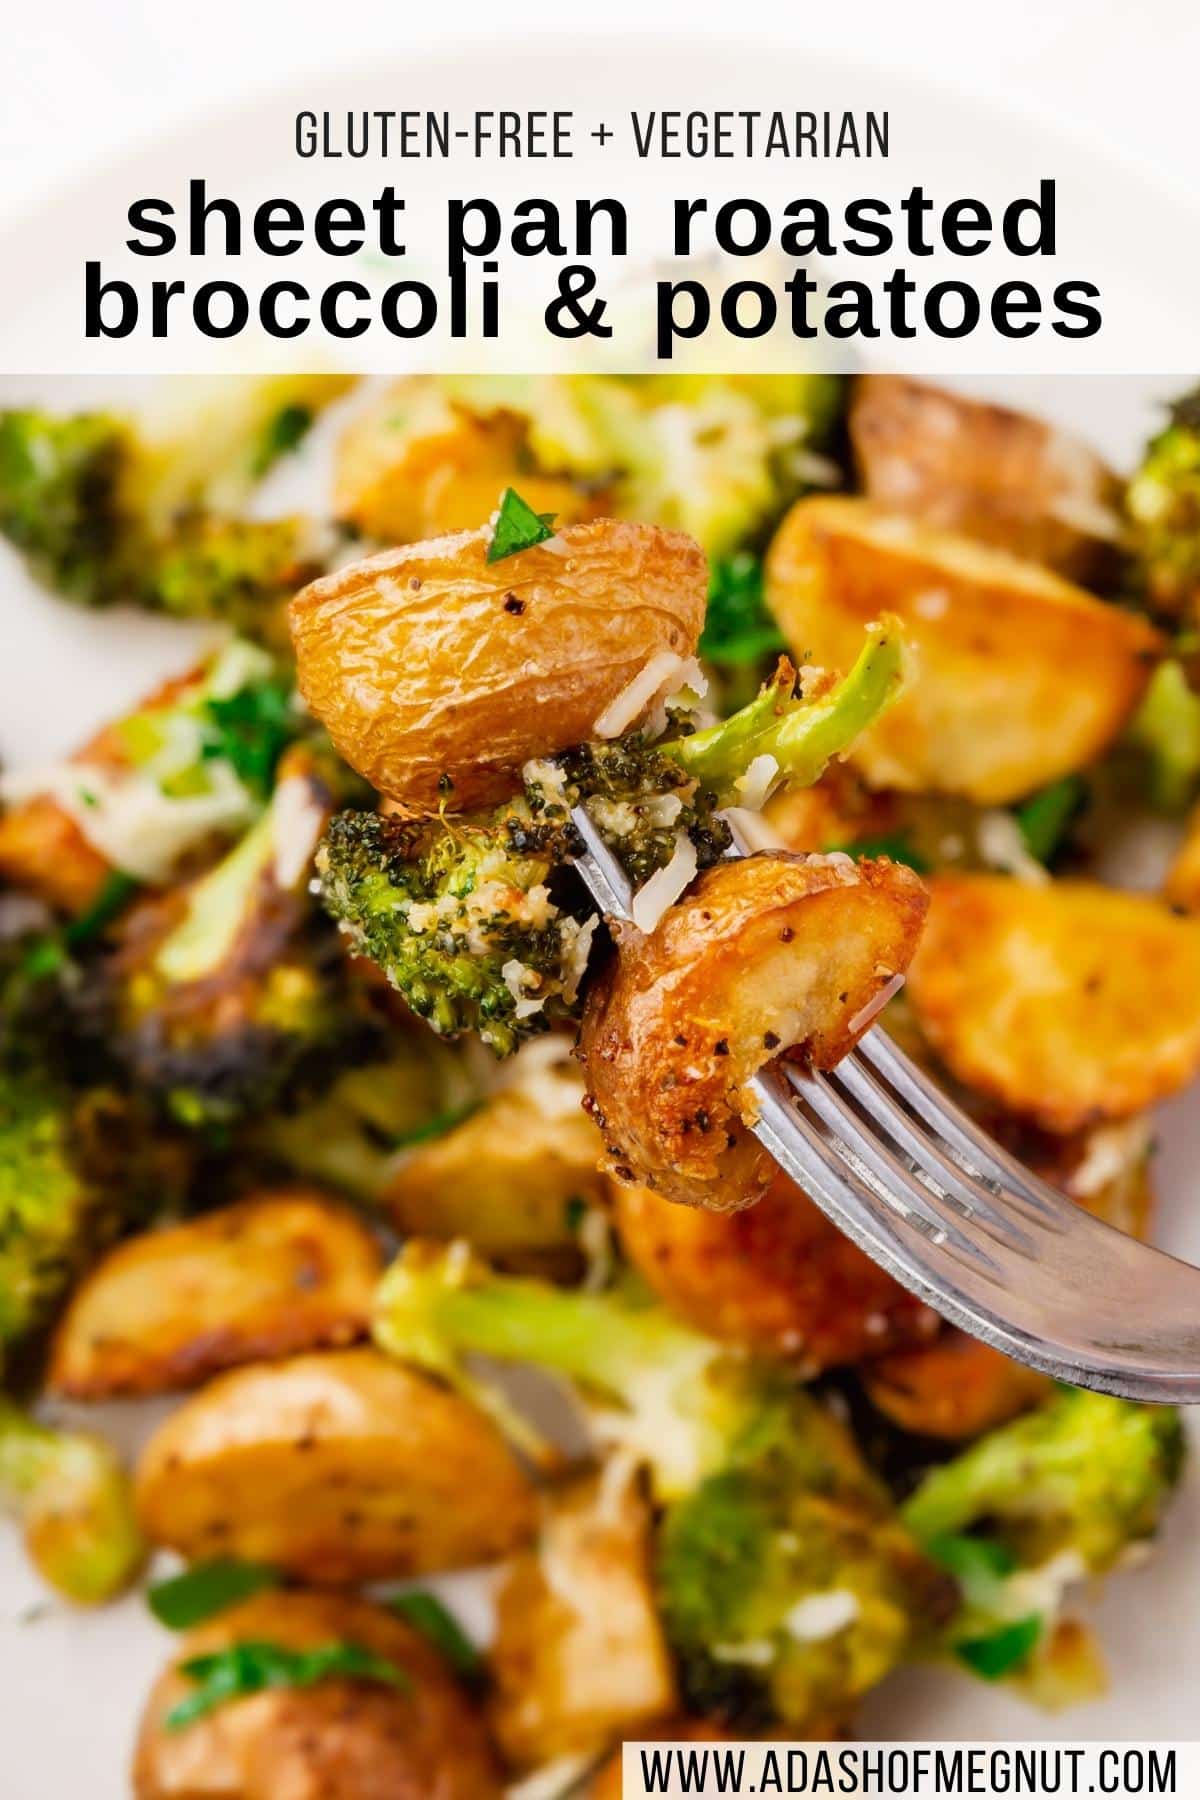 A fork holding a few pieces of roasted potatoes and broccoli over more roasted vegetables with a text overlay over the image.